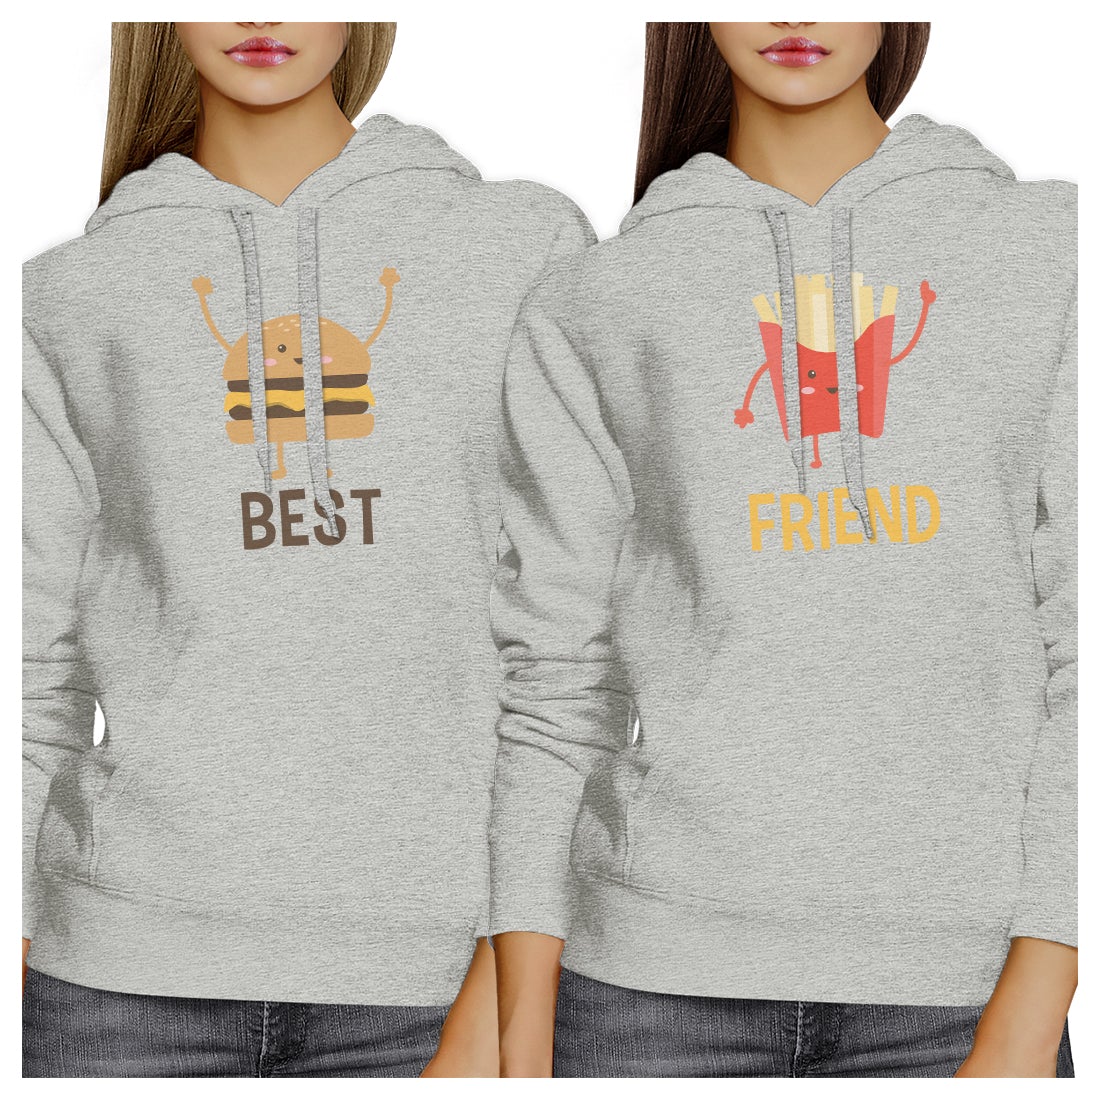 Hamburger And Fries BFF Pullover Hoodies Matching Gift Best Friends Light Gray